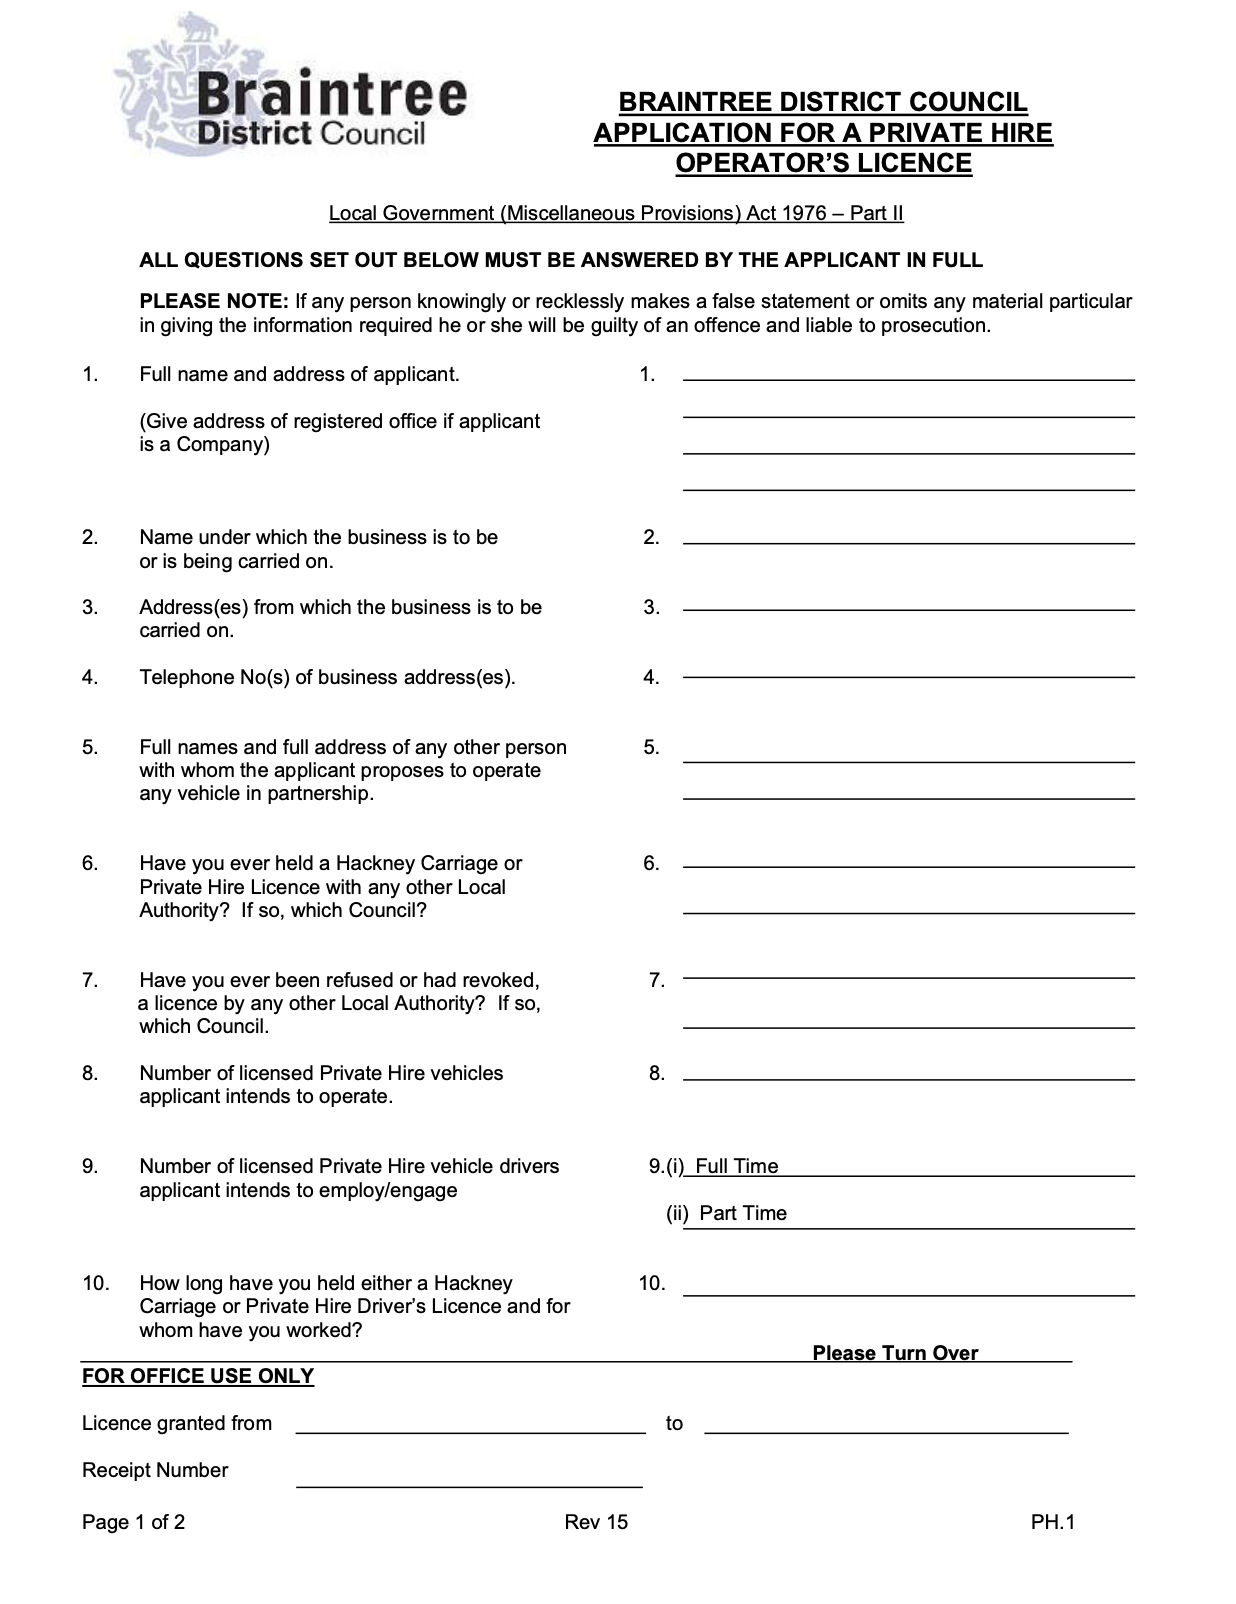 Private Hire Operator Application Form Braintree District Council